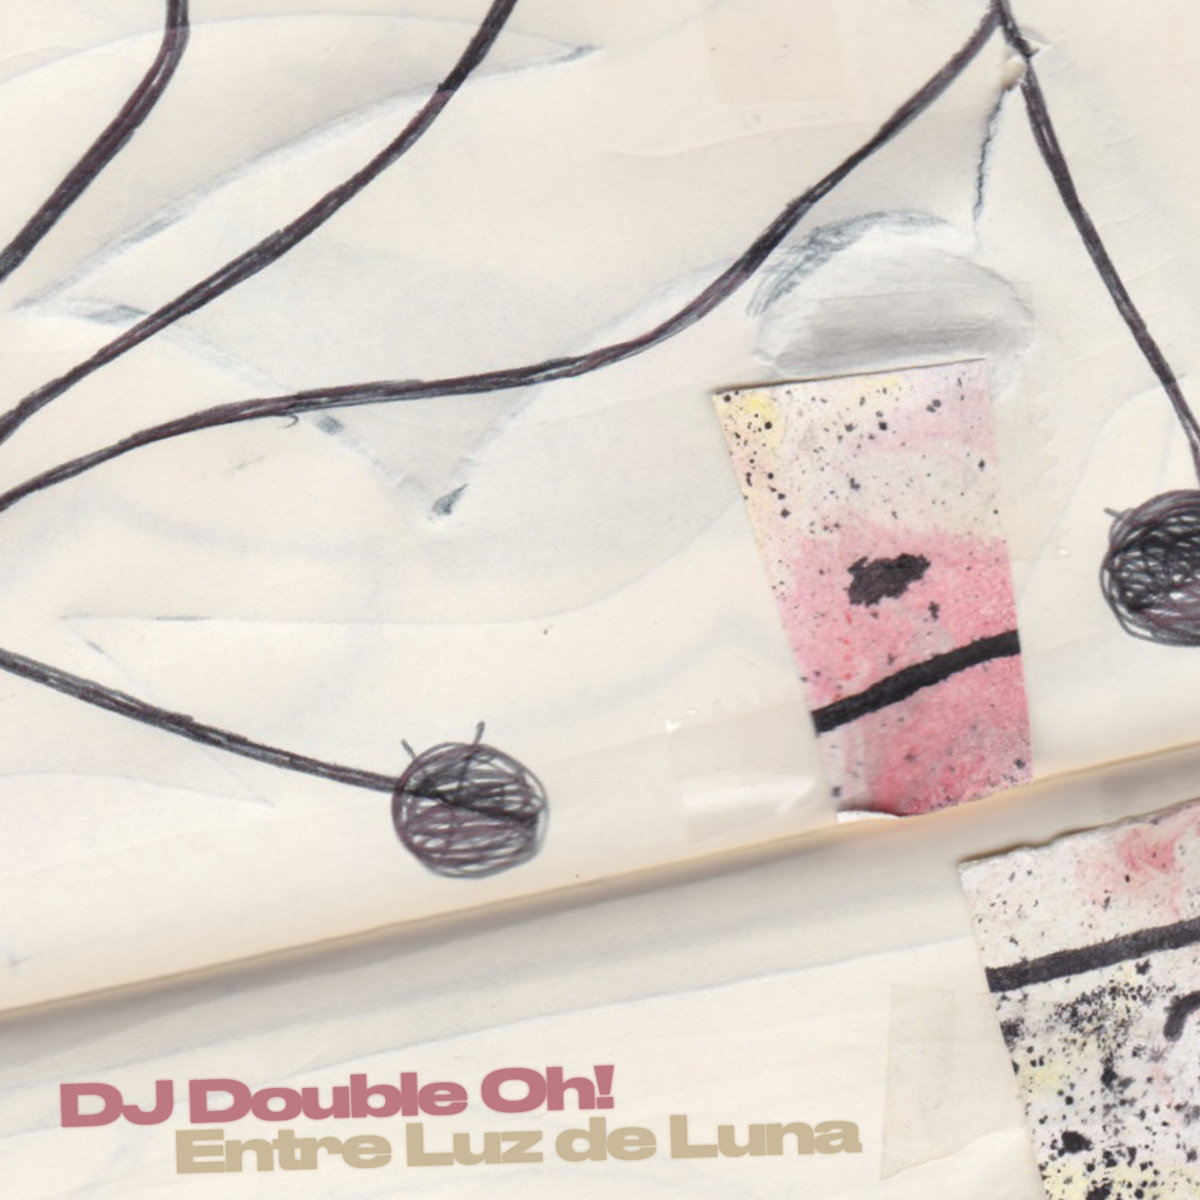 DJ Double Oh! cover